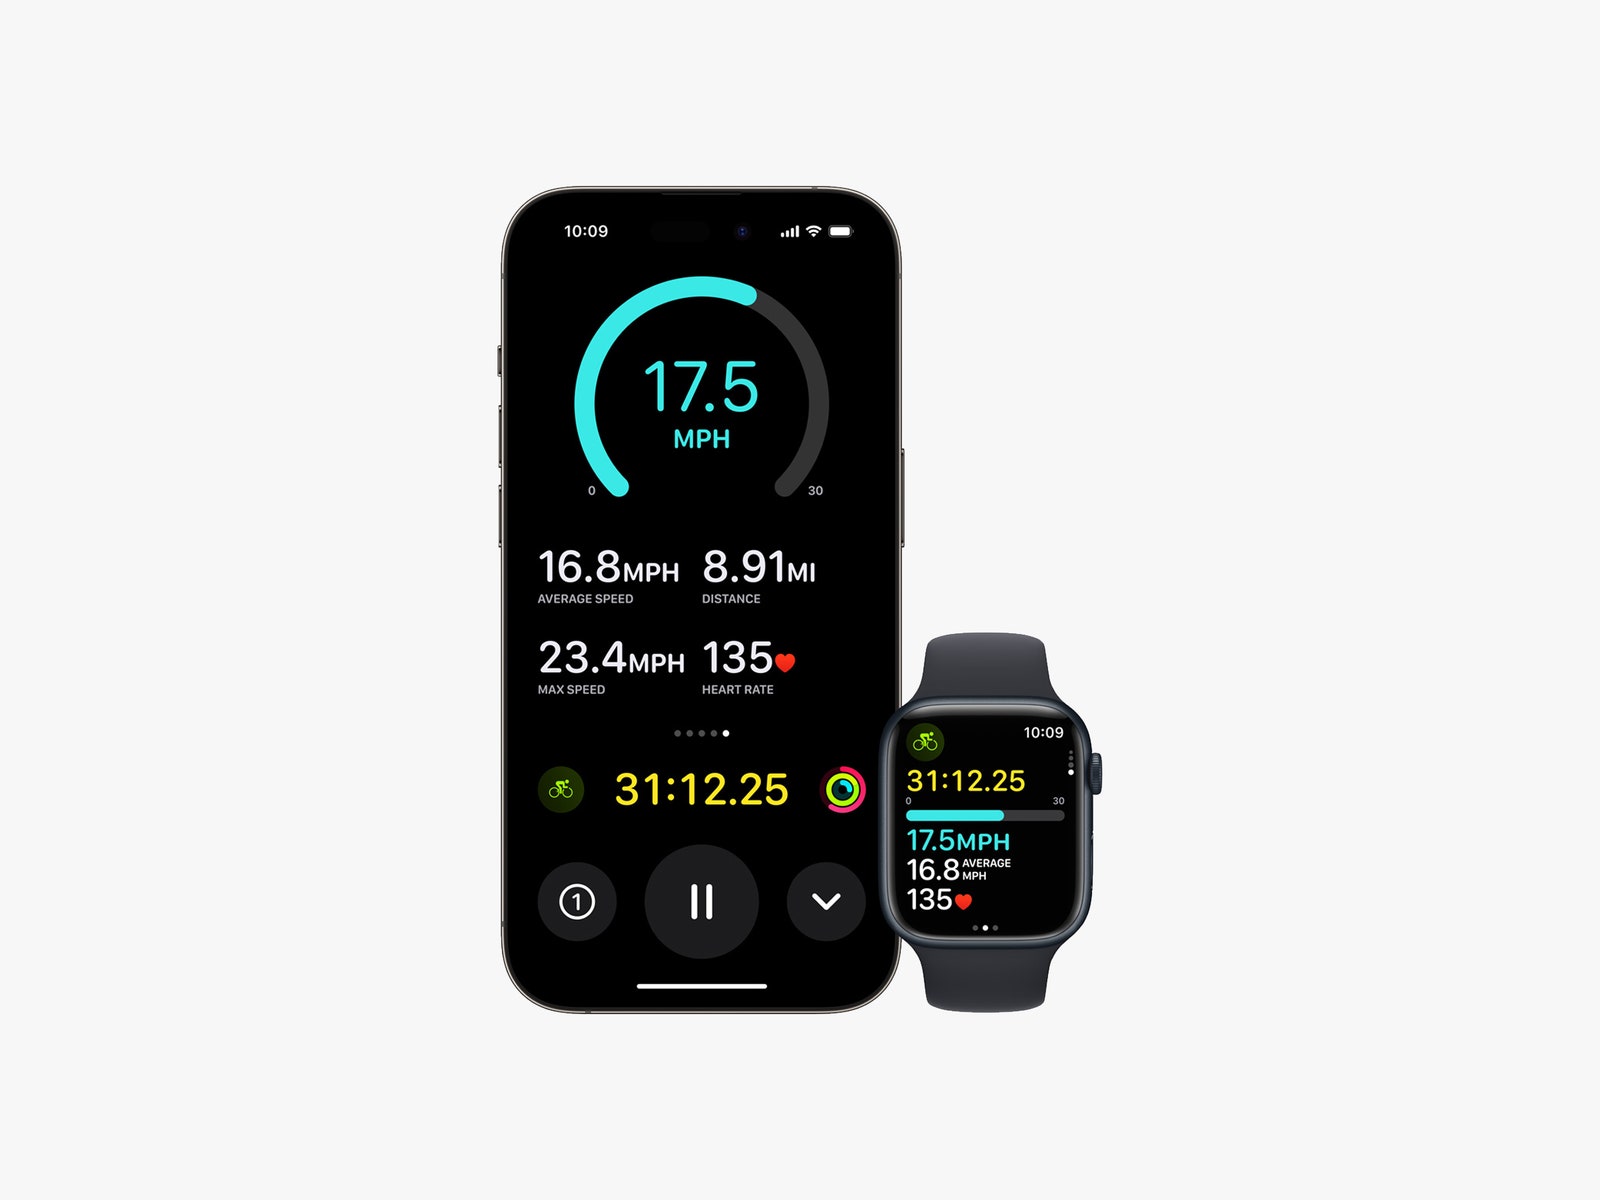 Apple iPhone and Apple Watch displaying the Live Workout feature